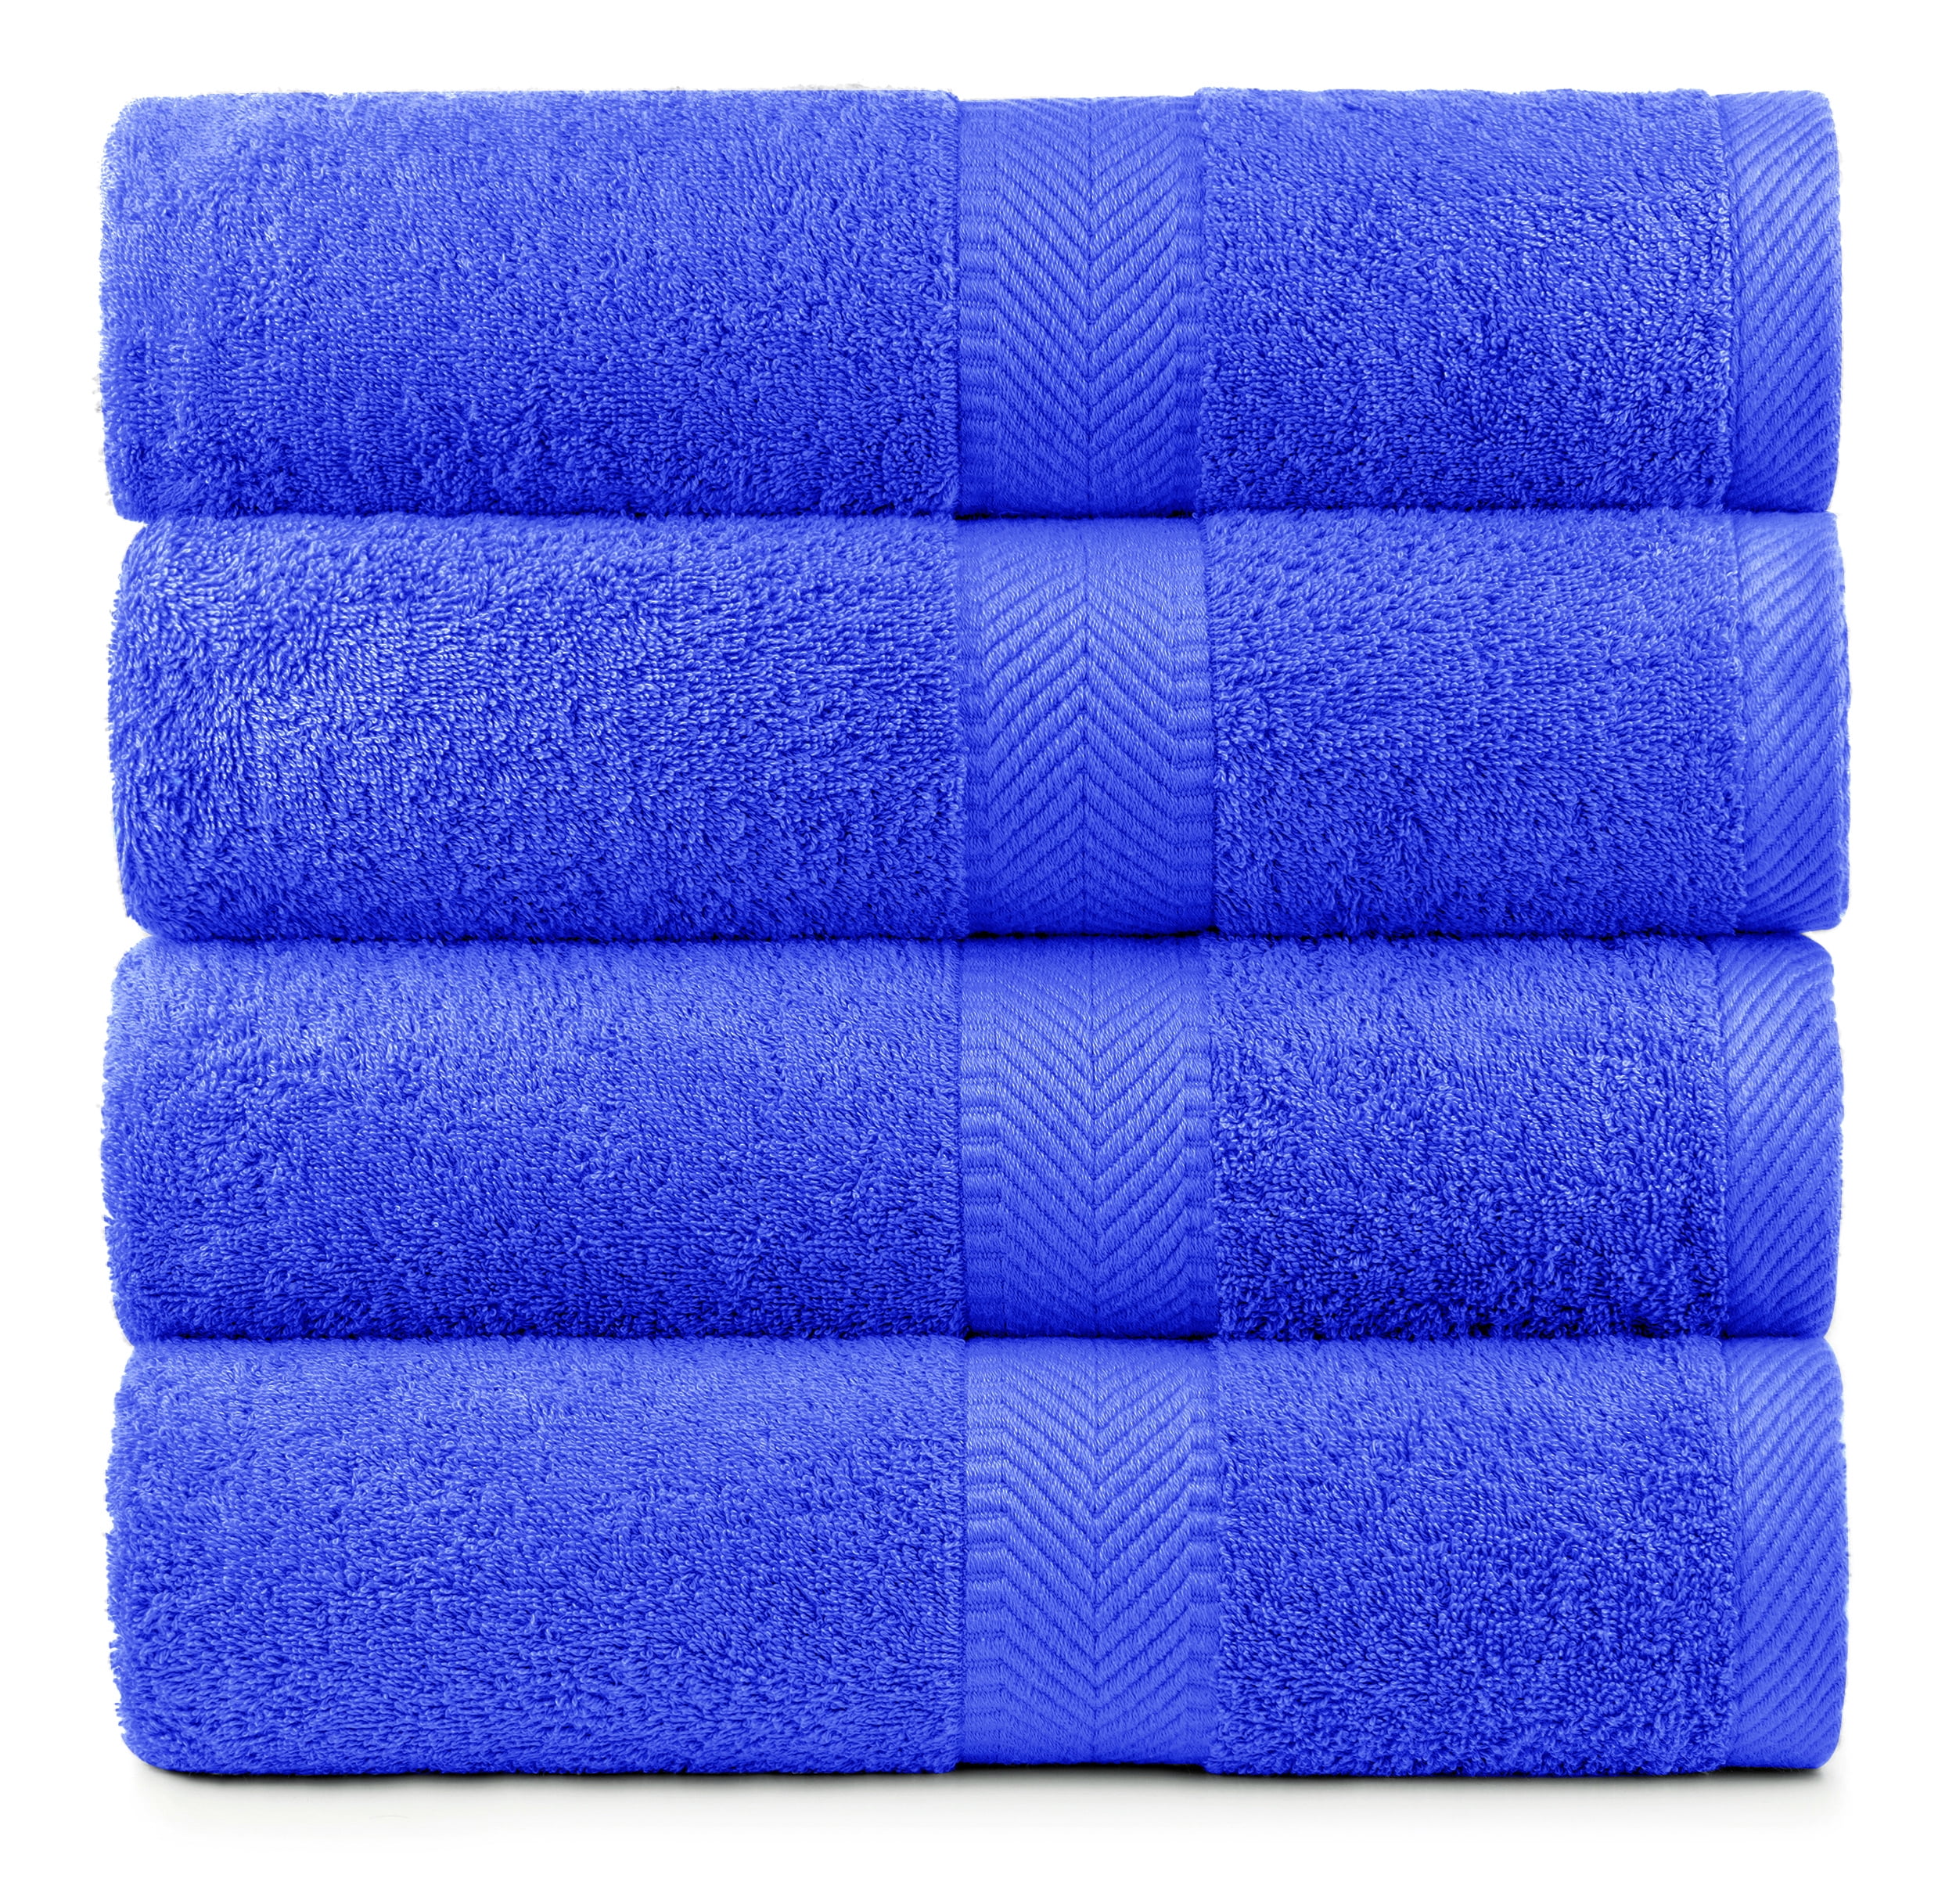 TAPHET Bath Towel Set Towels Bathroom Accessories Cotton Towel Adult Bath  Household Thickened Cotton Men and Women Soft Absorbent Towel That Does Not